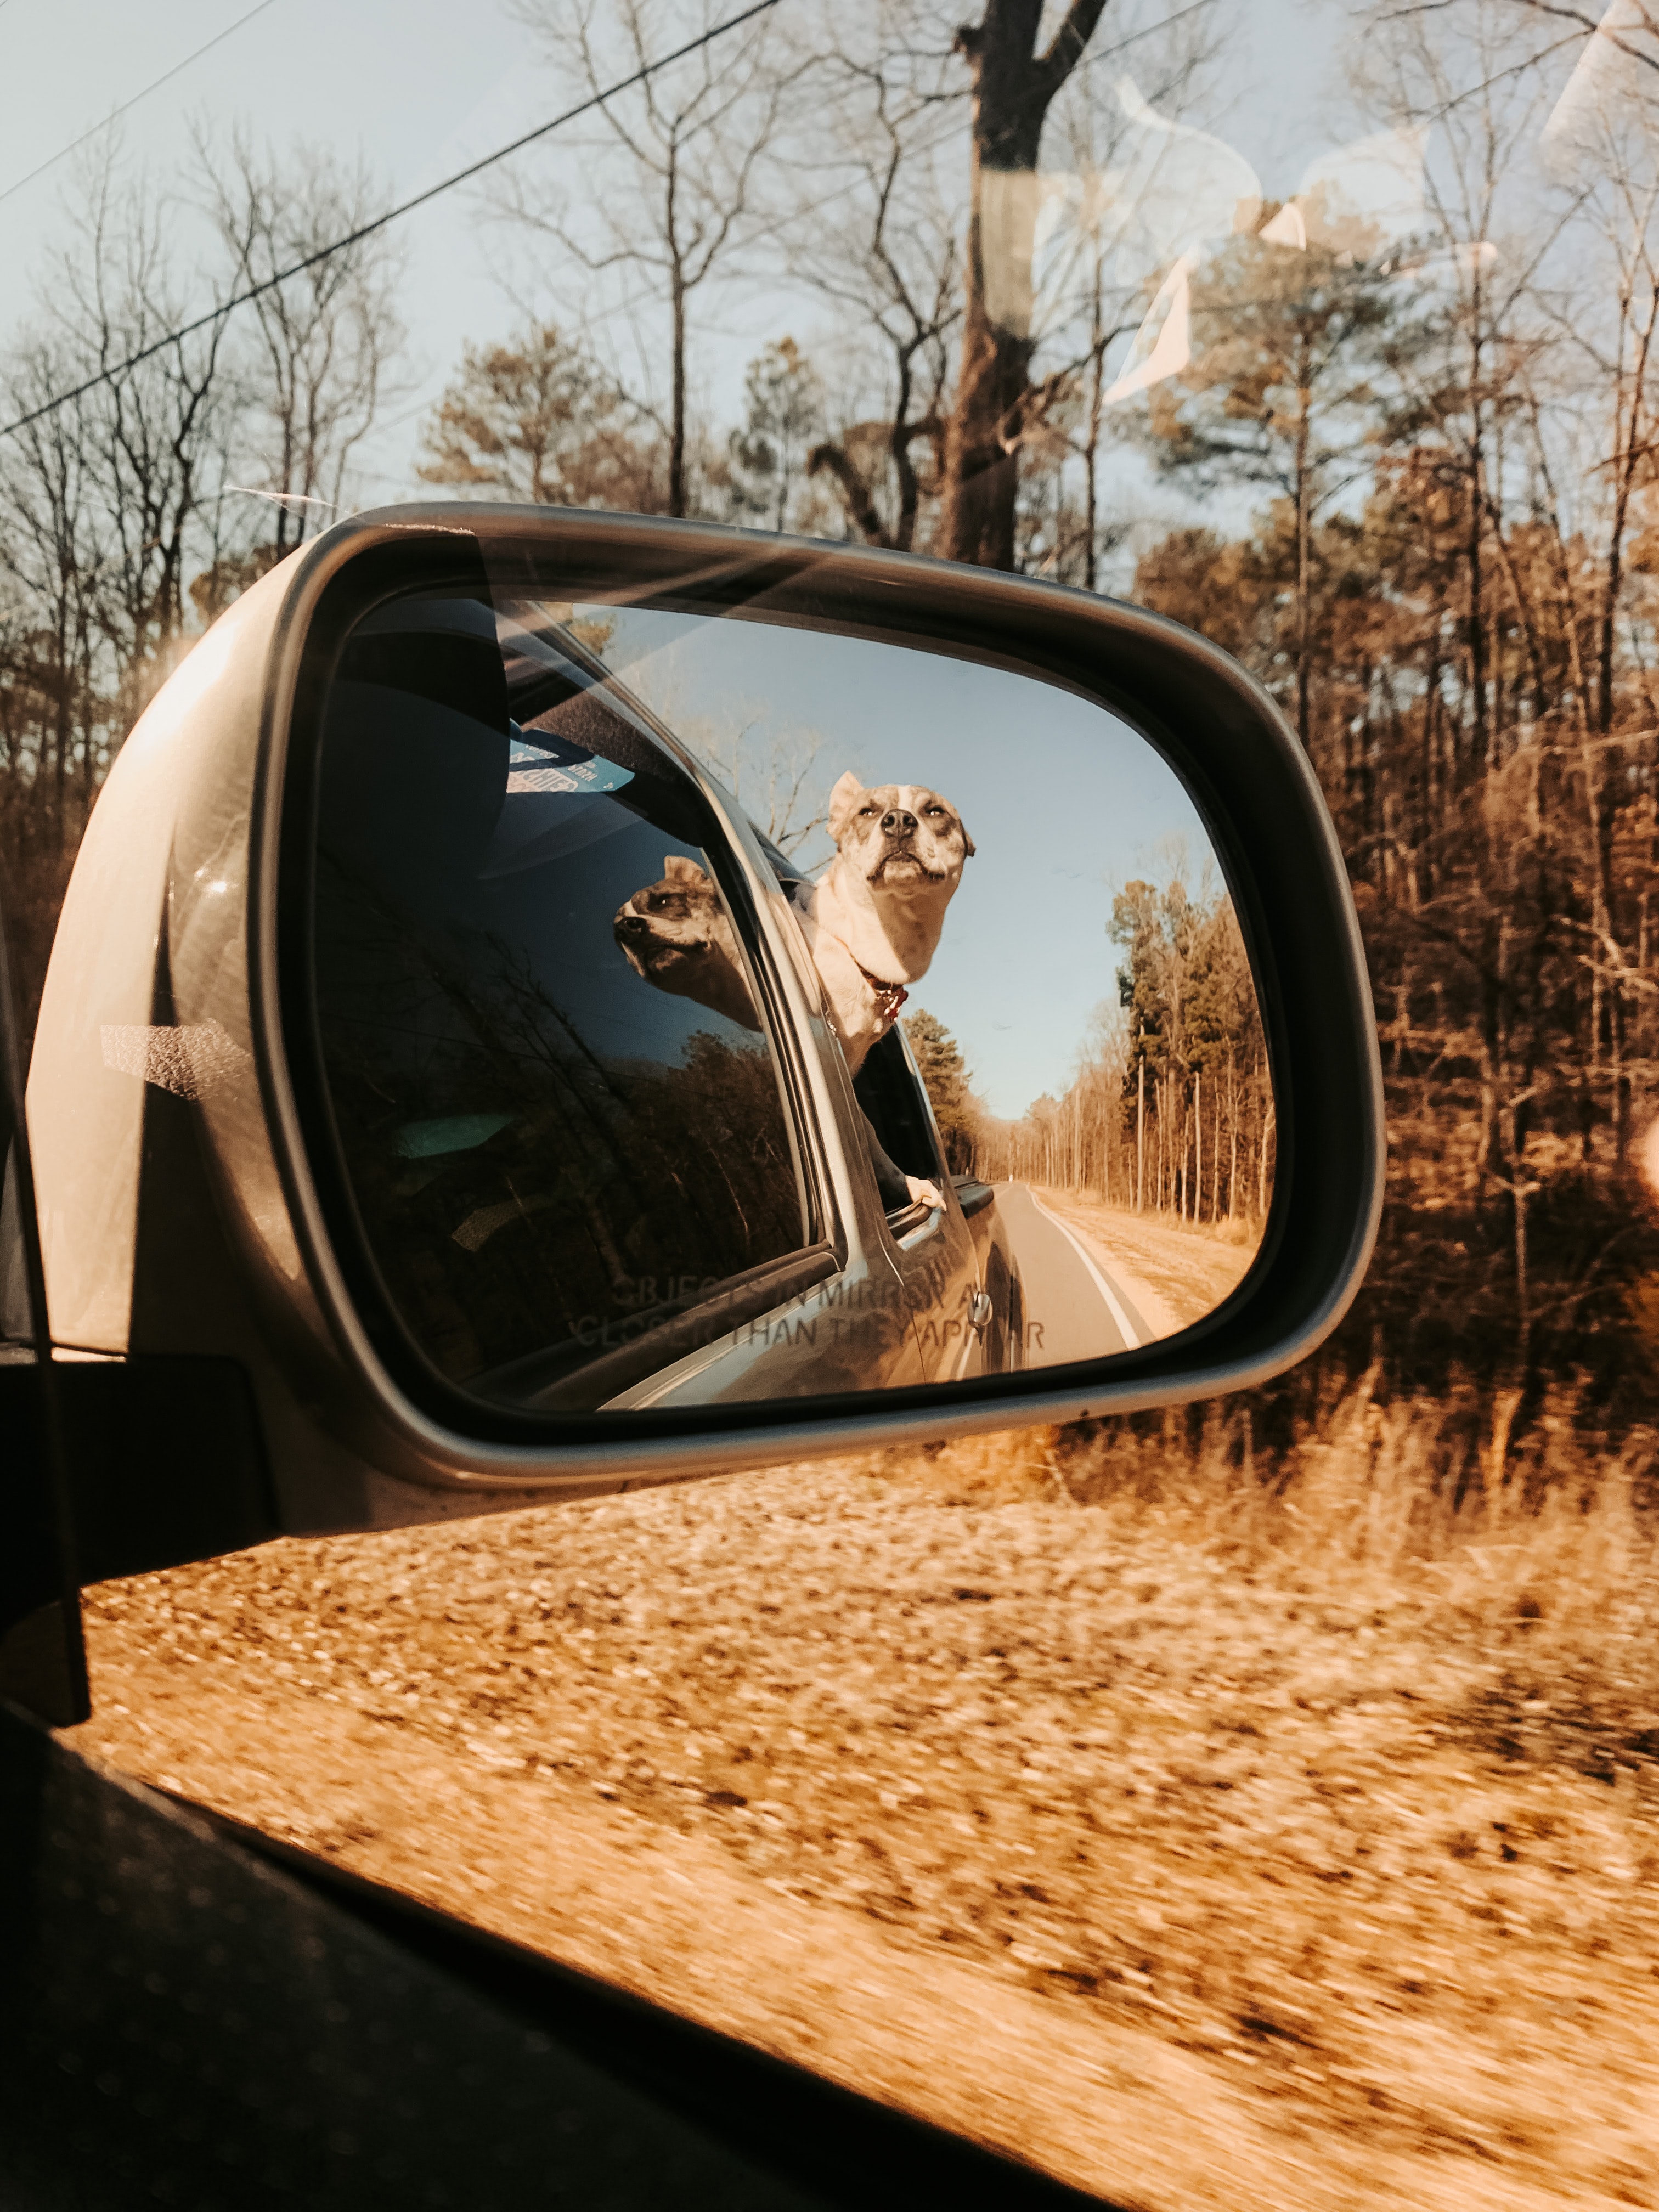 reflection of a dog in a car side window